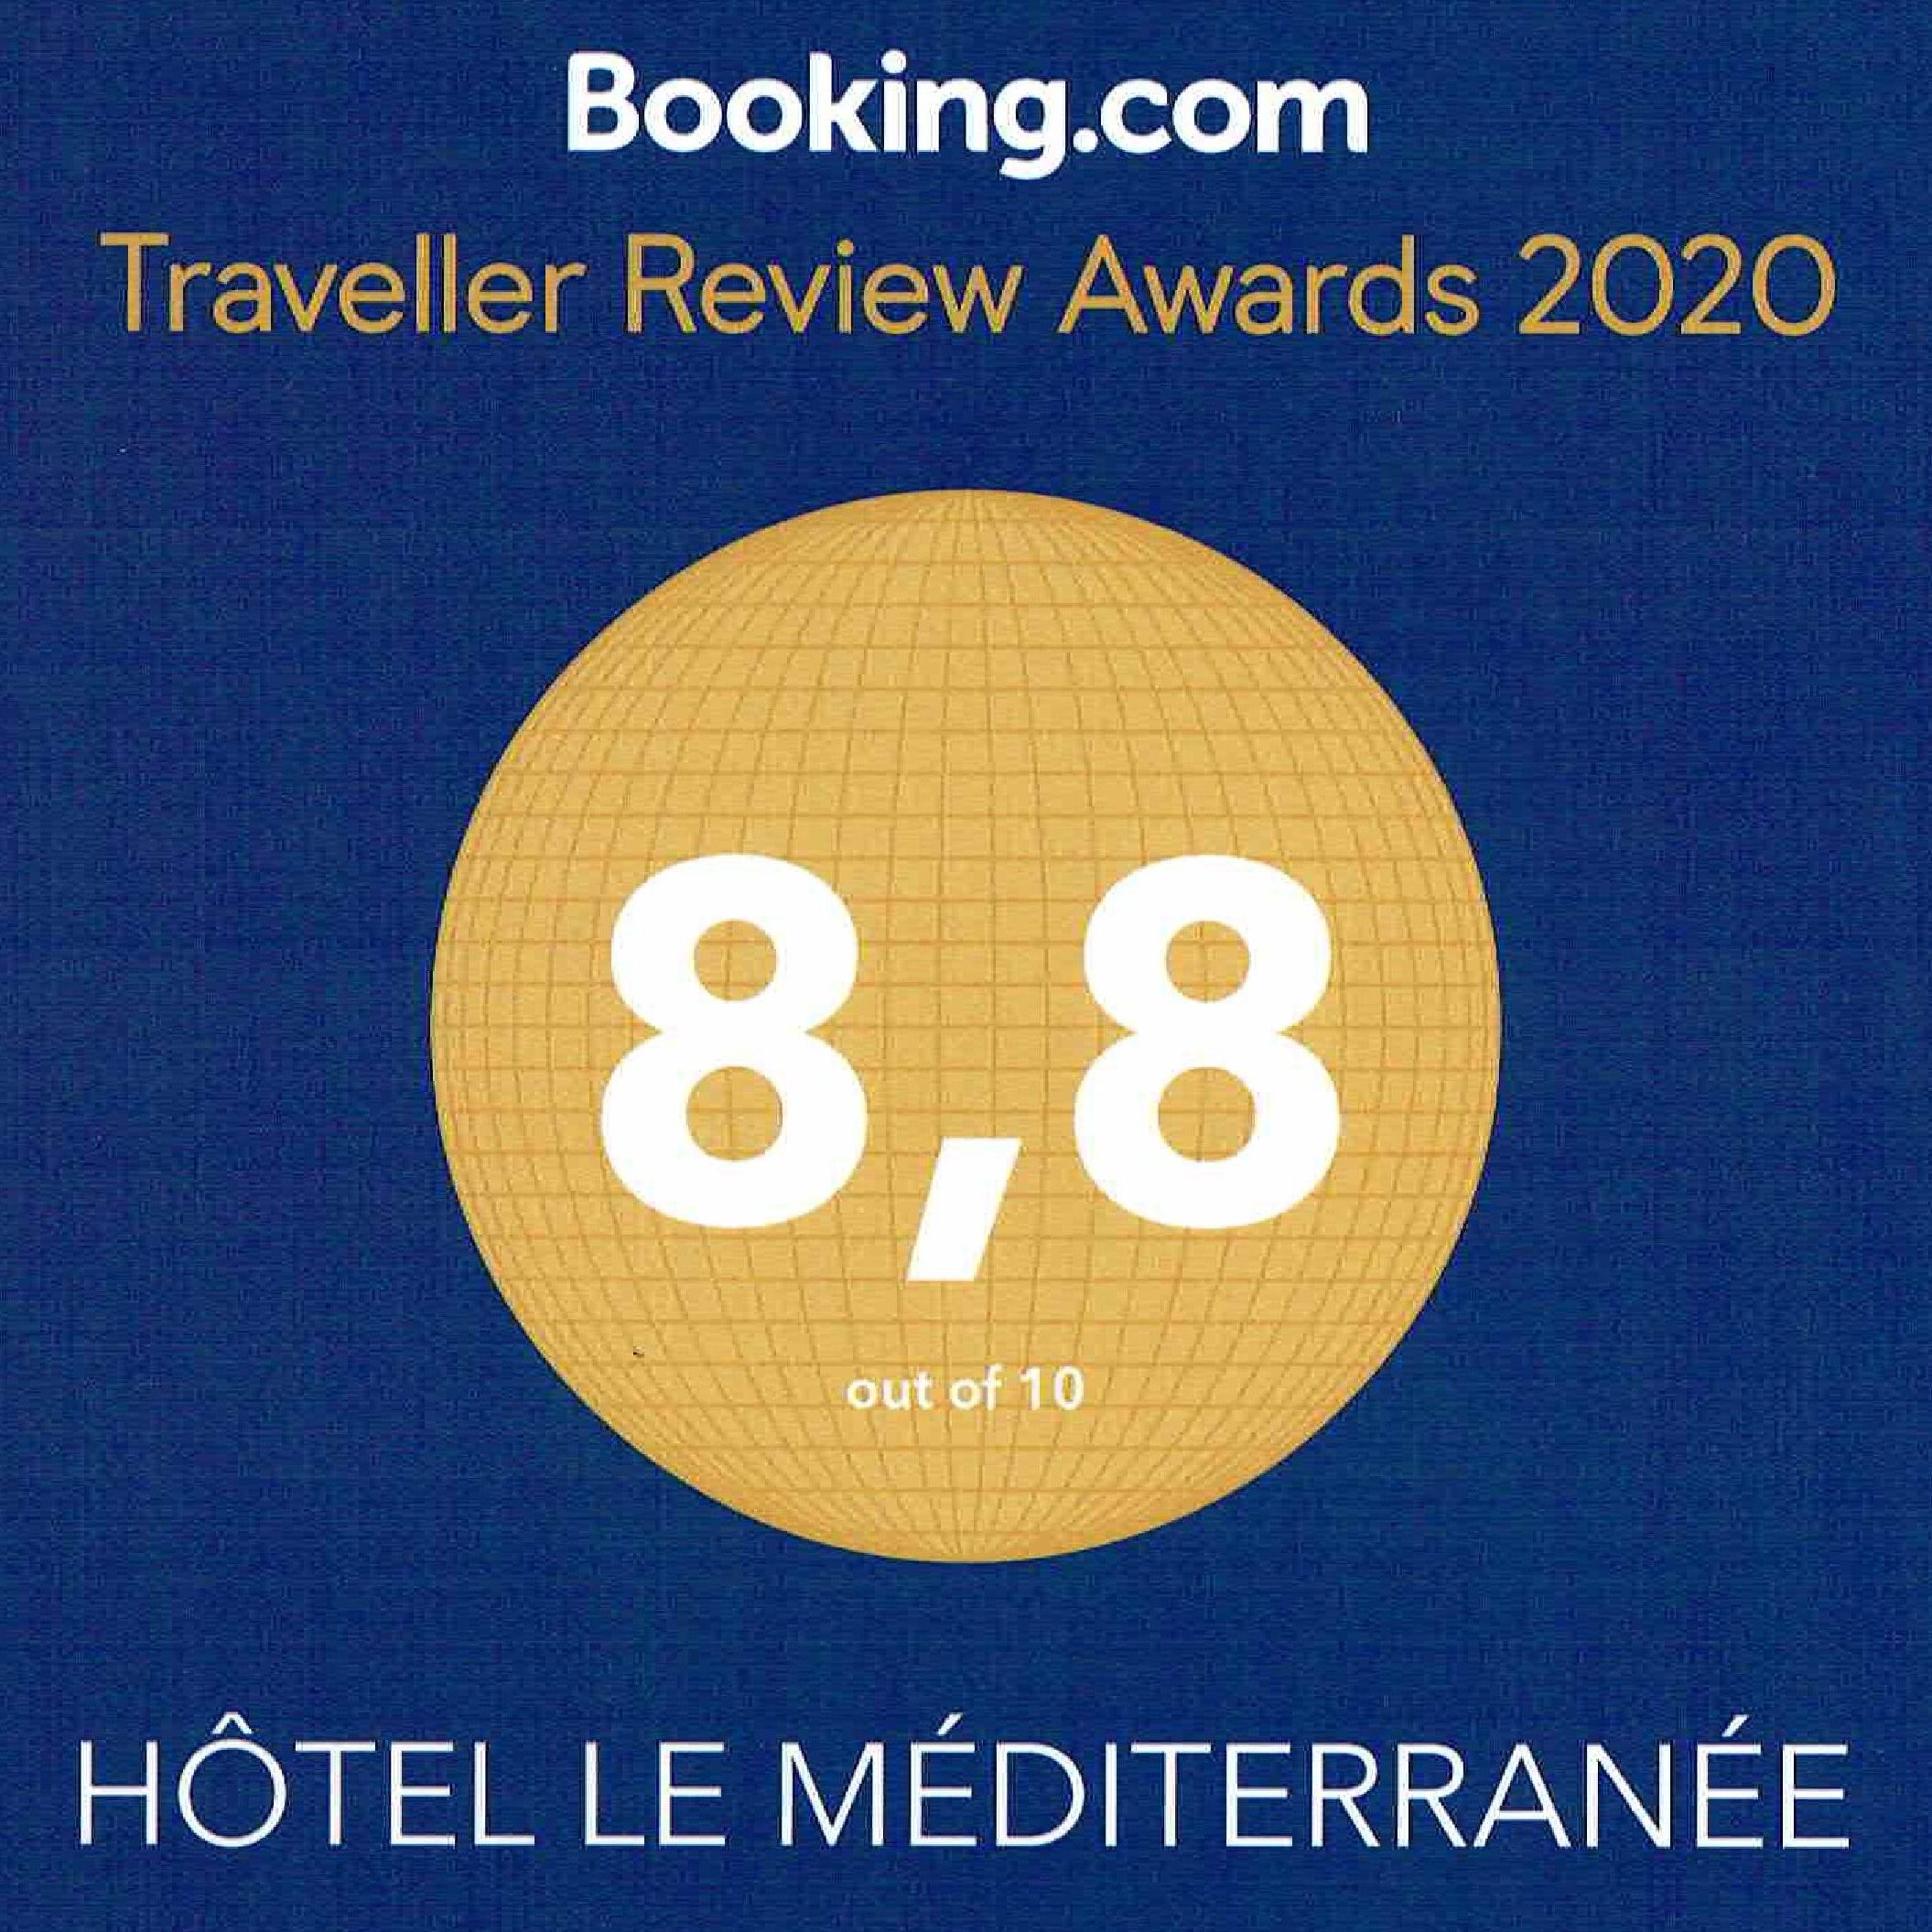 An 8,8 average rating of the hotel rated by vistiors at booking.com